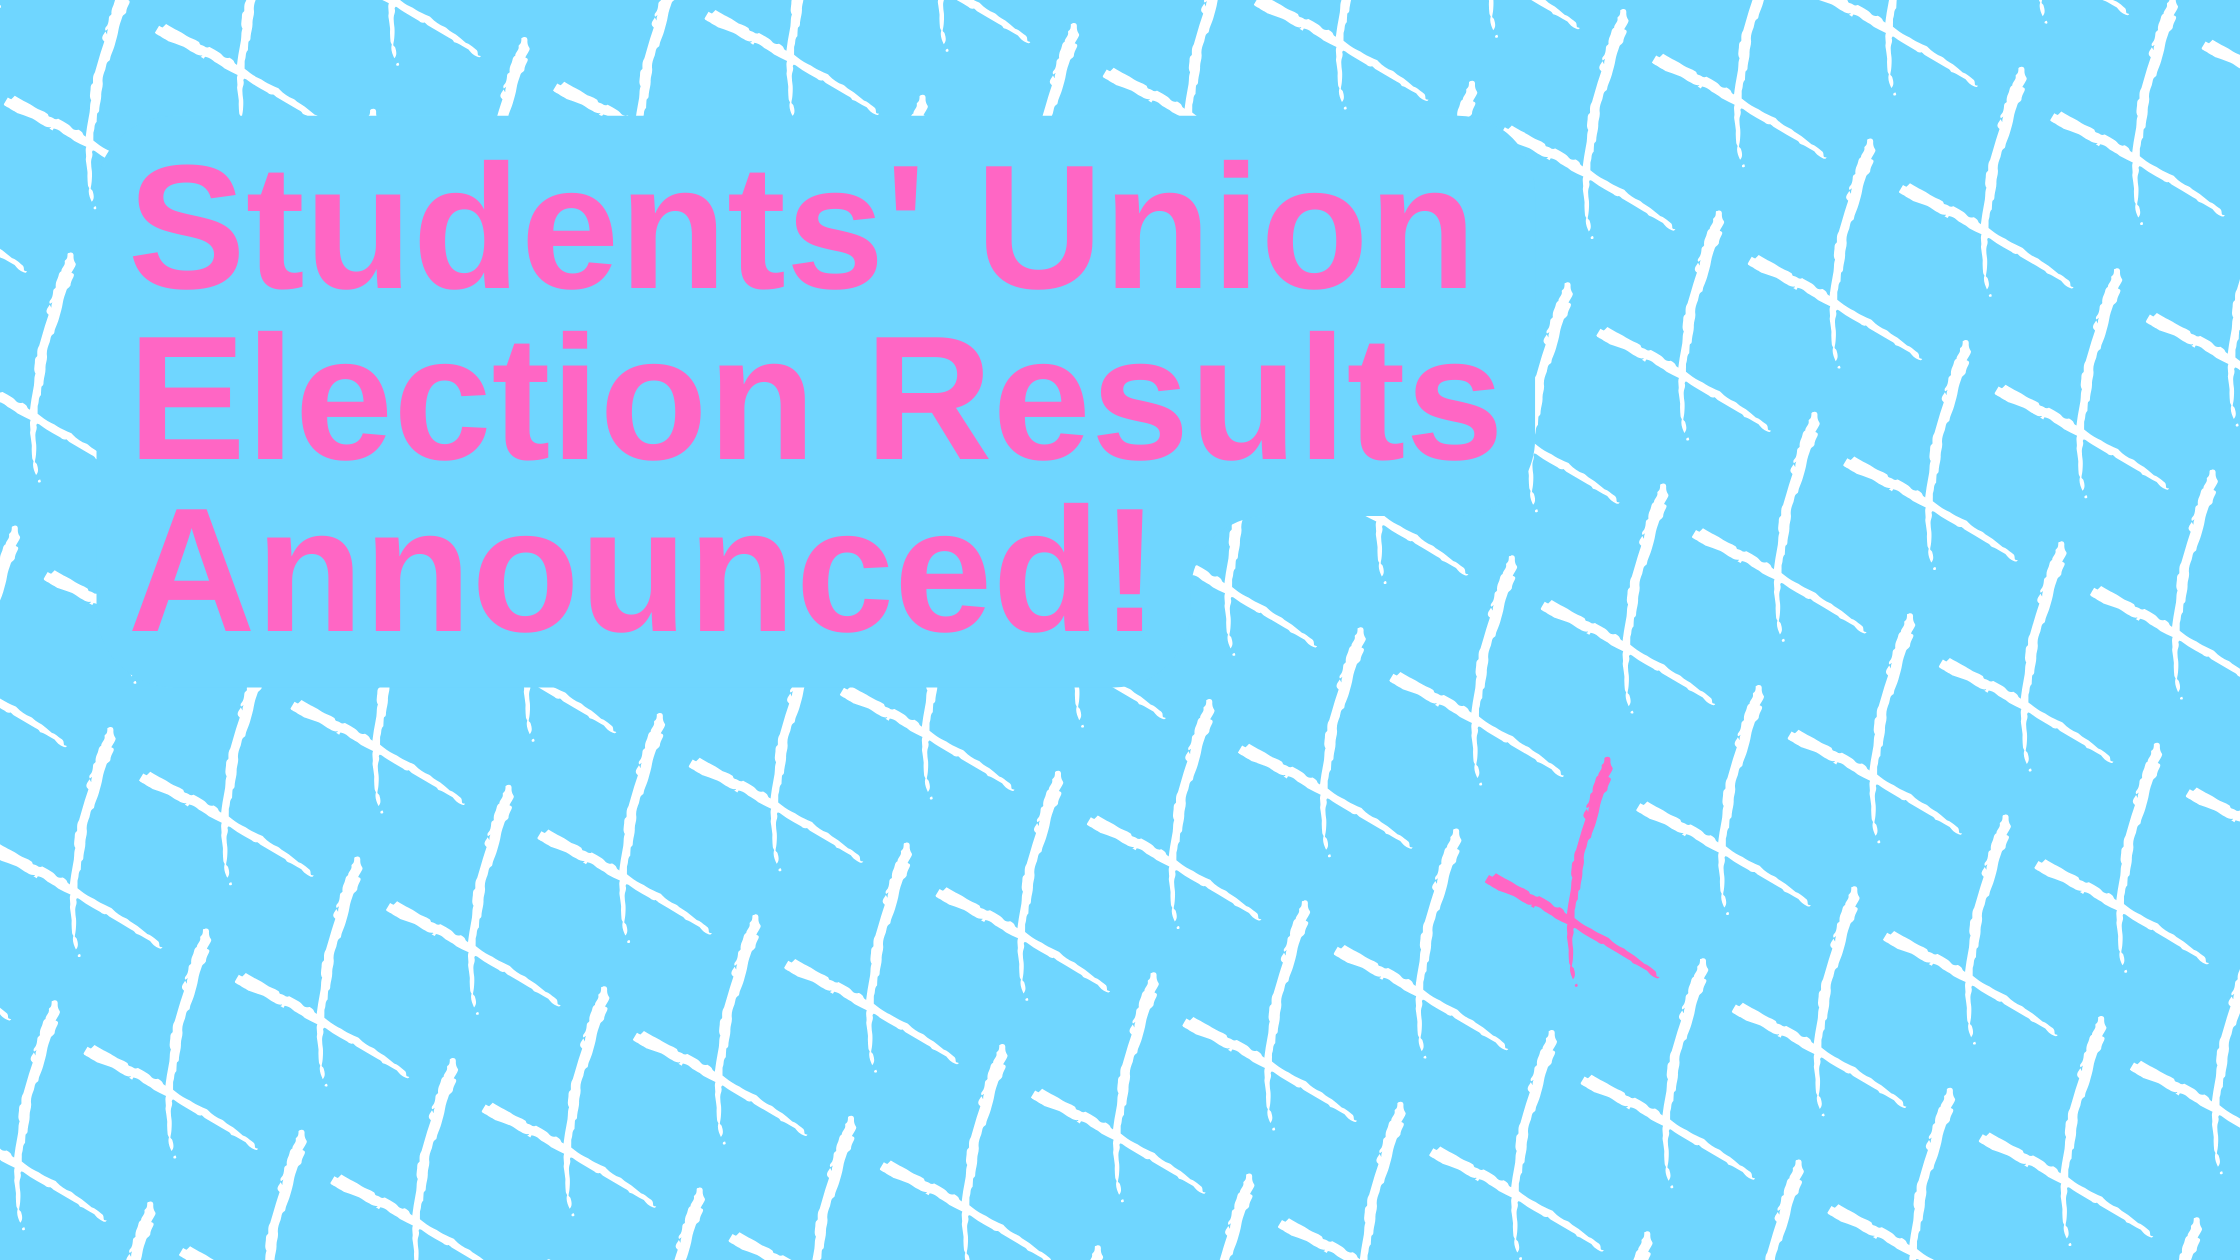 Union election results